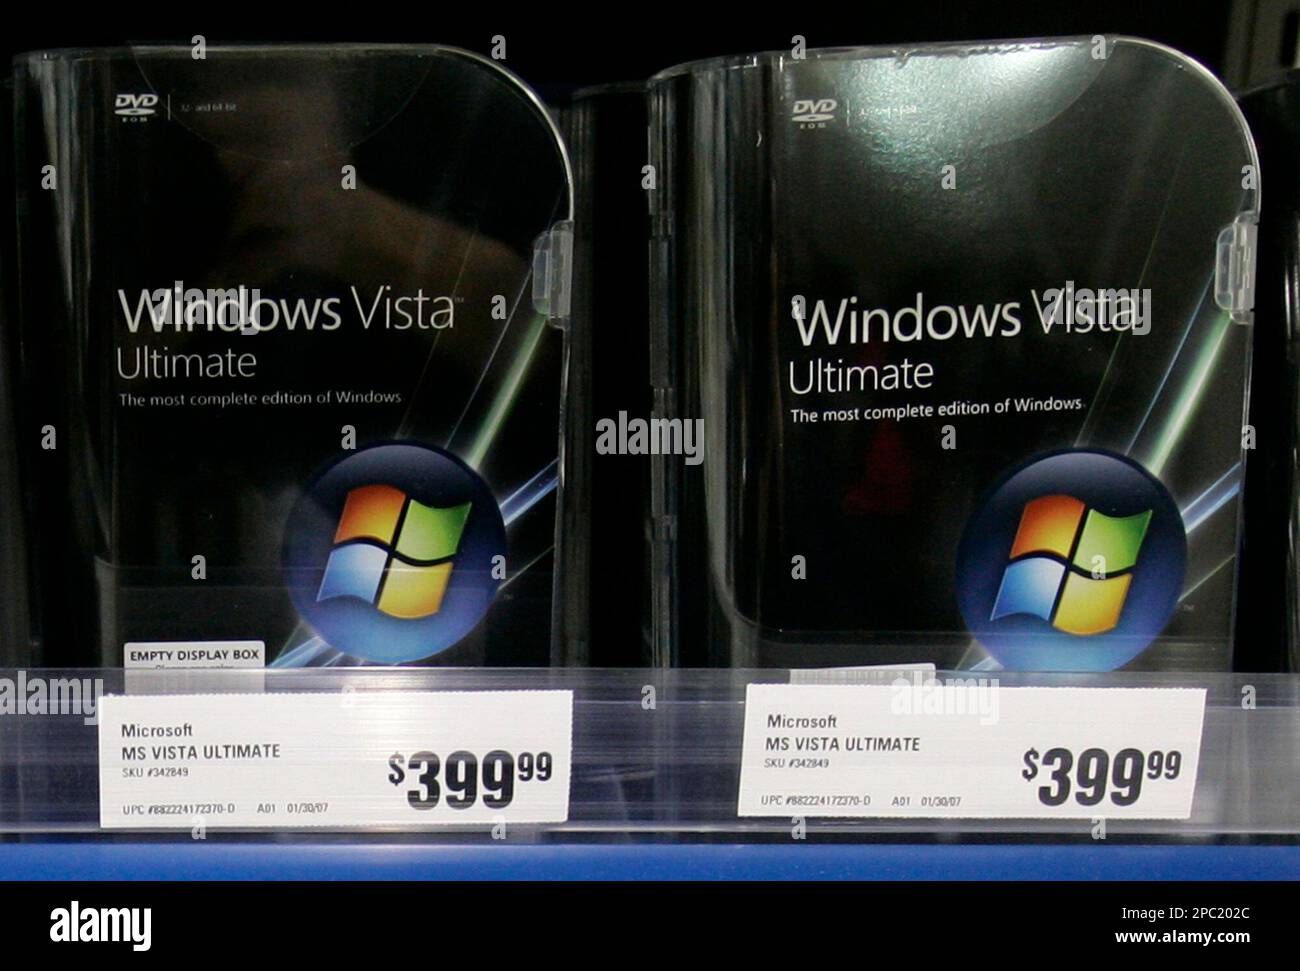 Copies of Microsoft Corp.'s Windows Vista Ultimate computer operating  system are shown for sale at the non-upgrade price Tuesday, Jan. 30, 2007  at a CompUSA store in Mountlake Terrace, Wash., north of